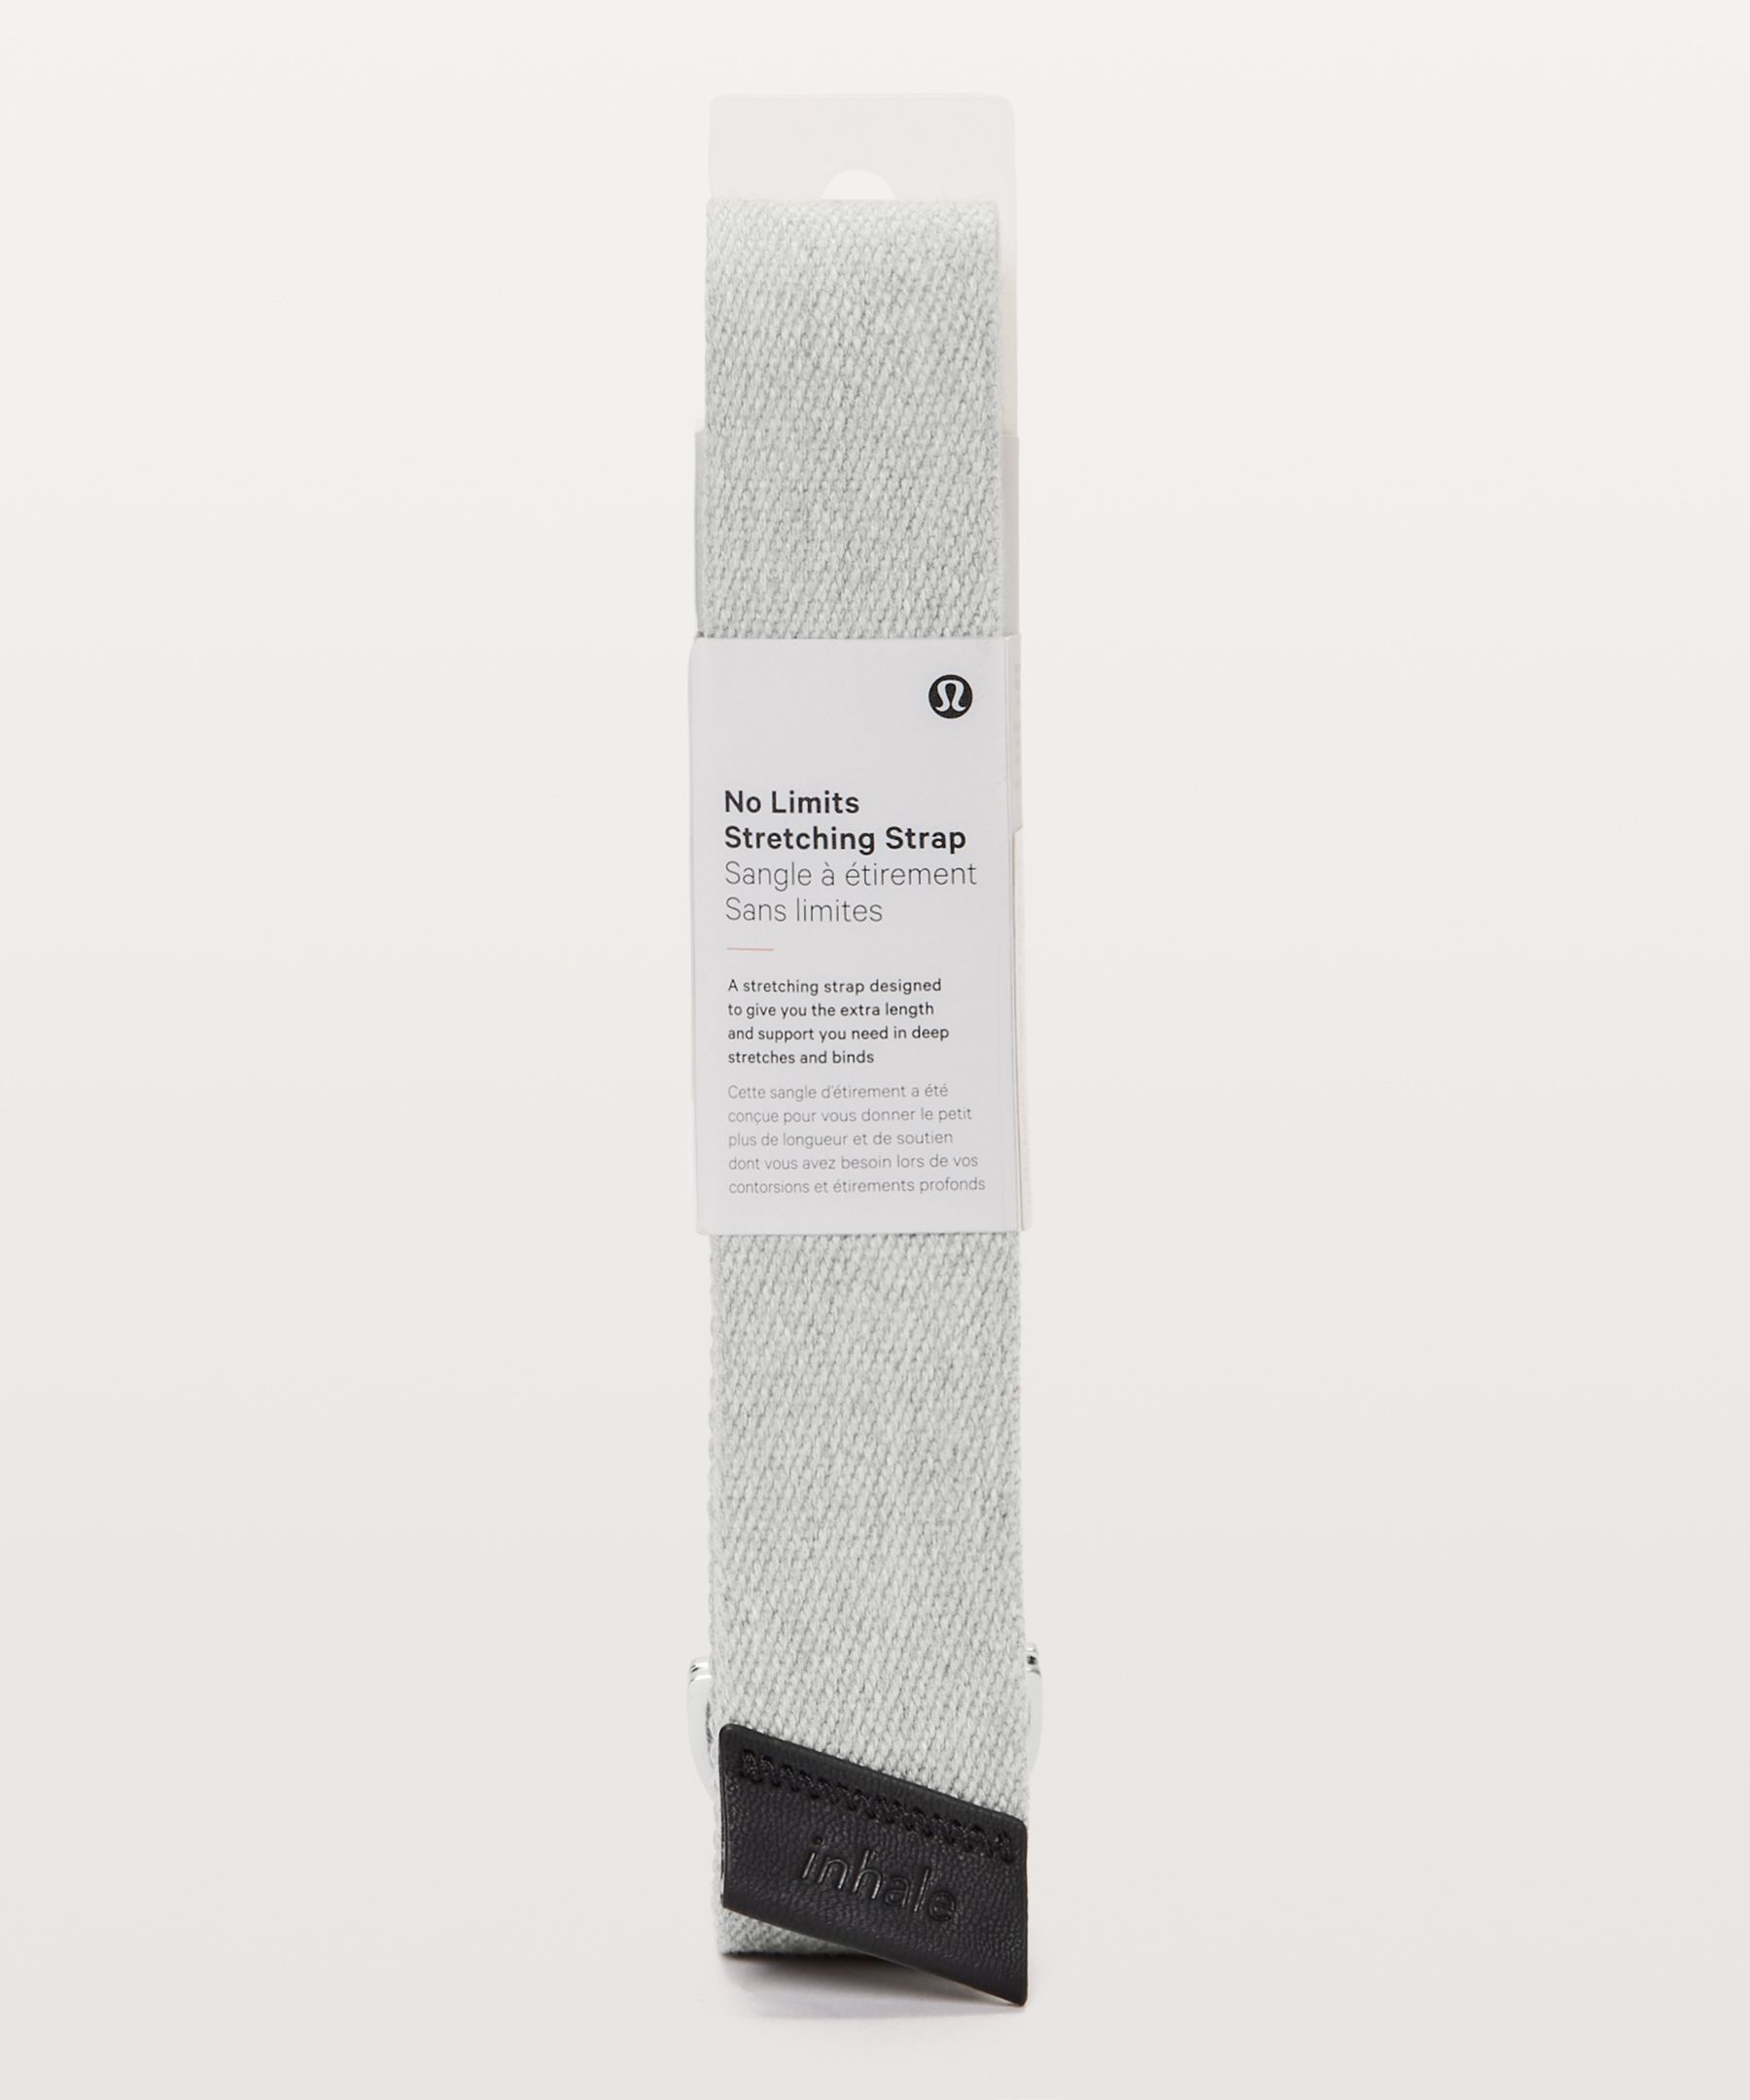 Lululemon No Limits Stretching Strap In Heathered Core Light Grey